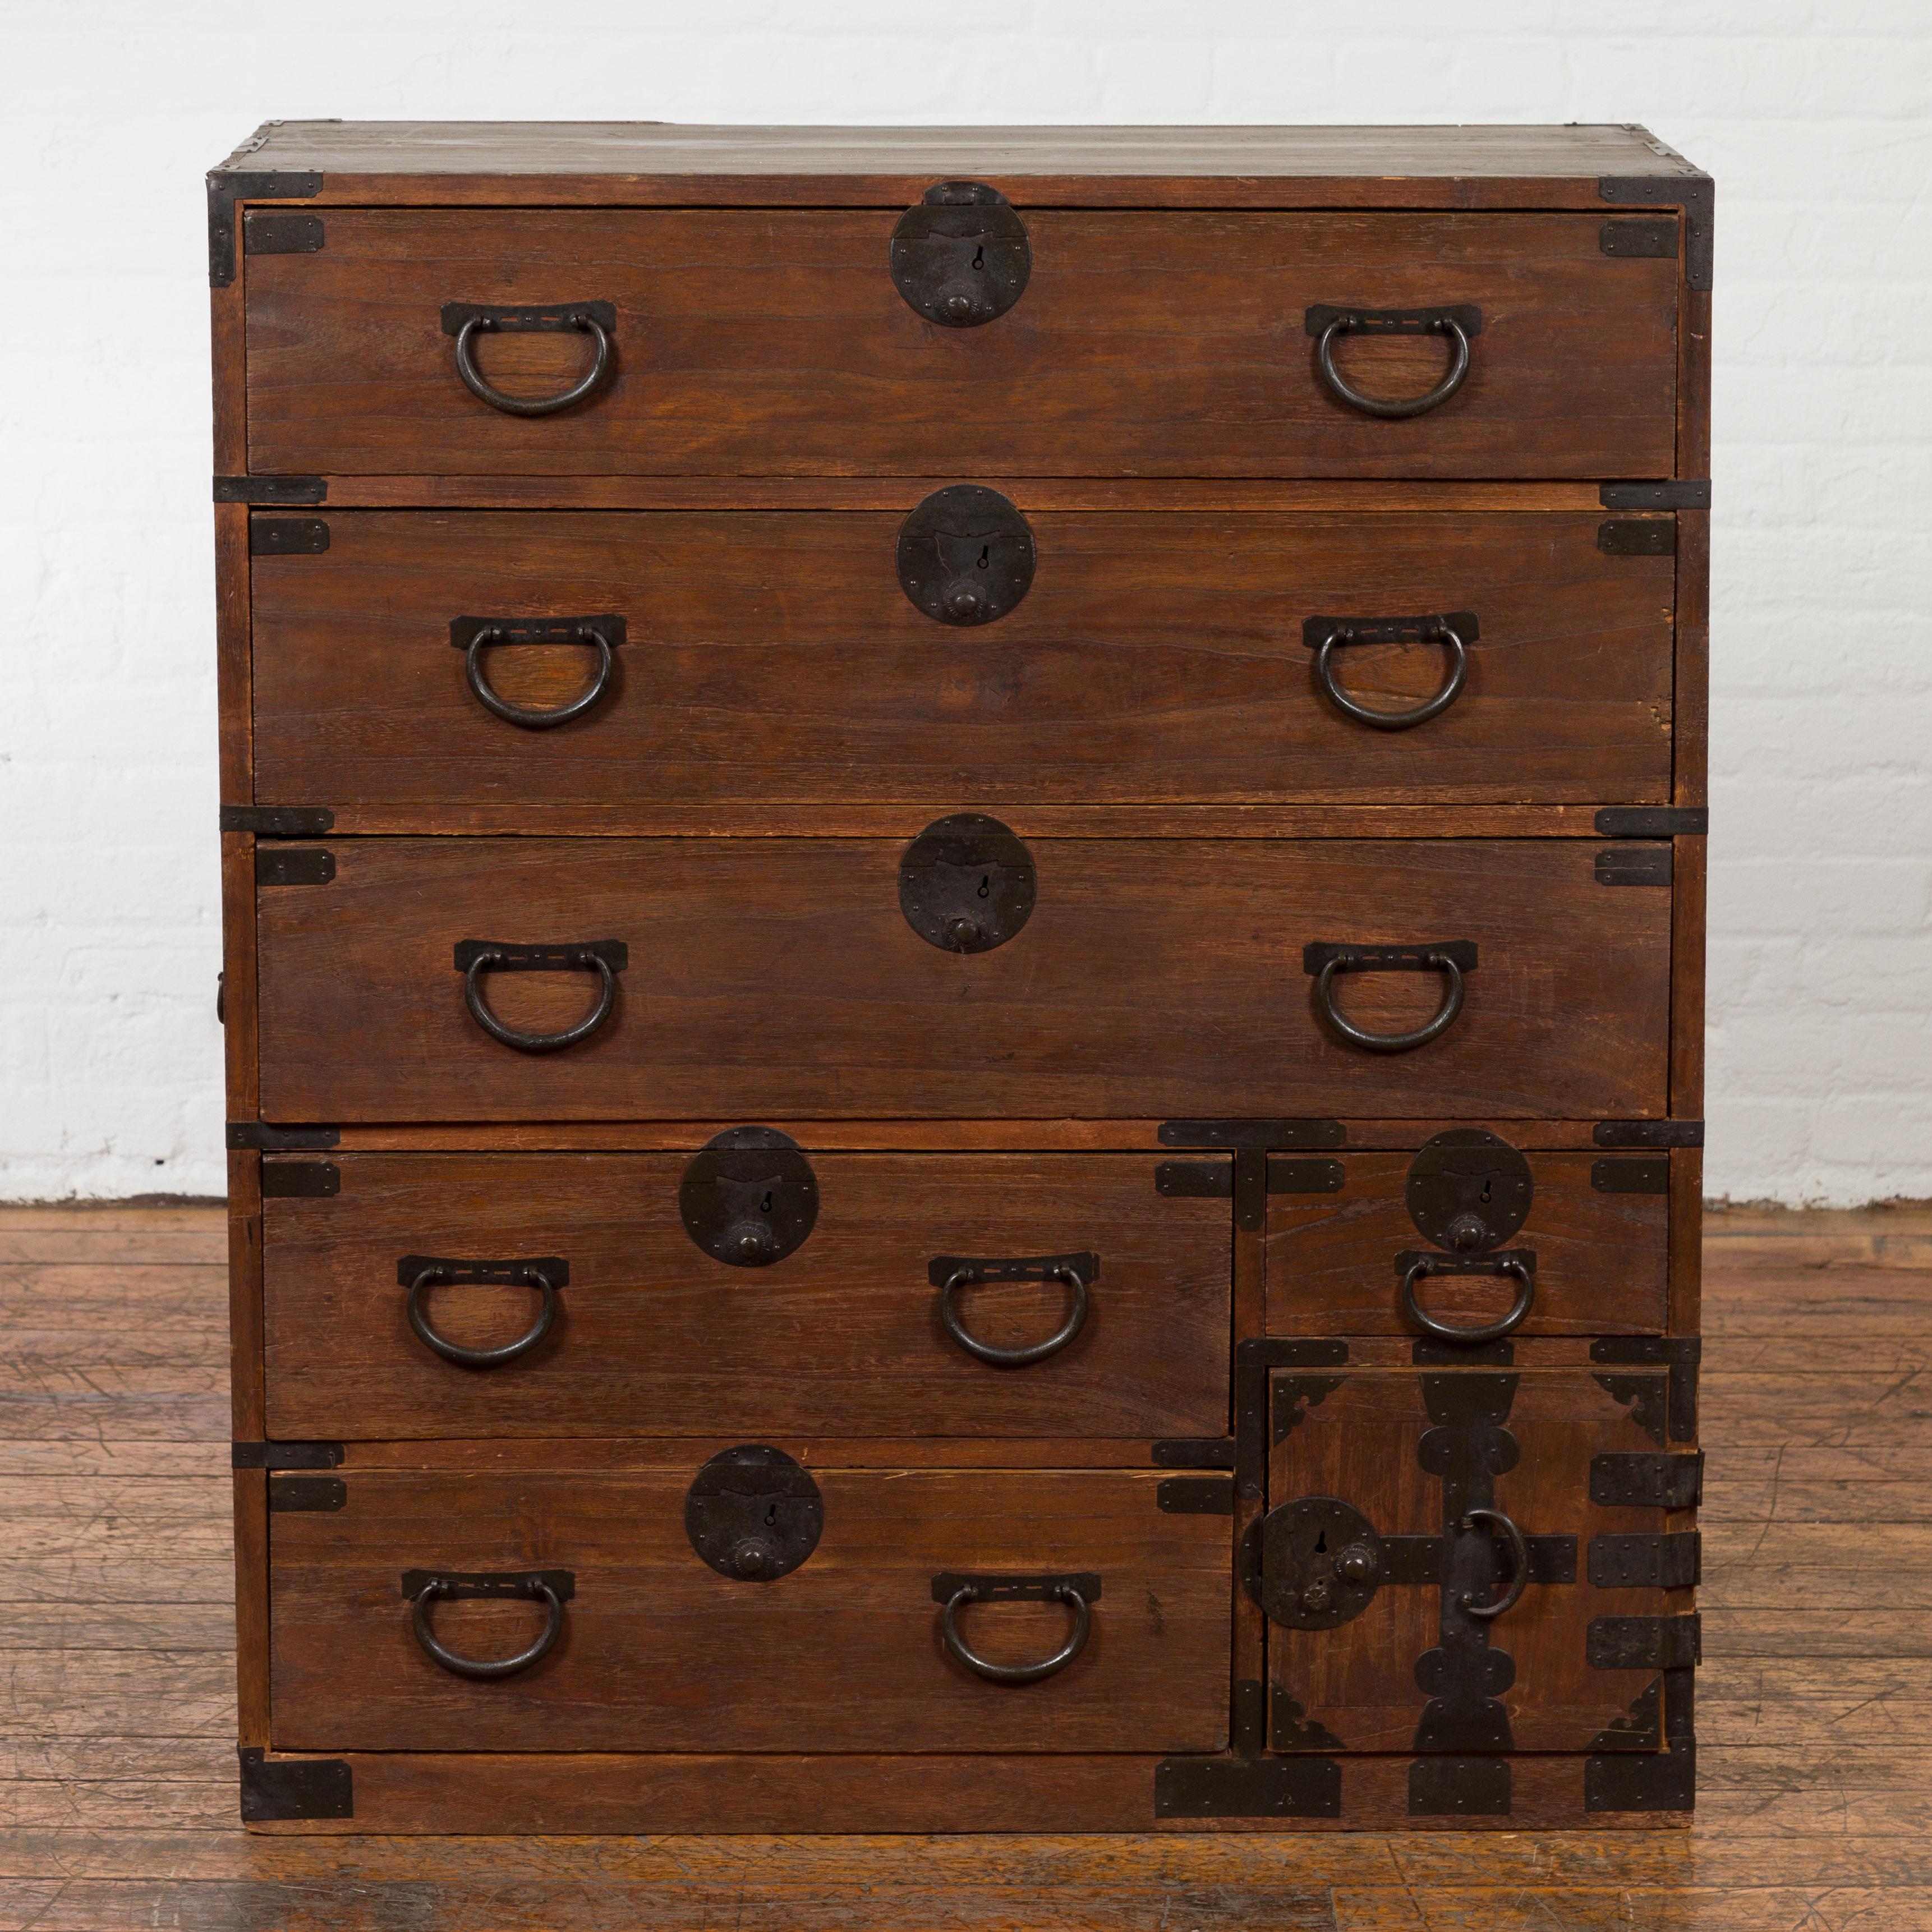 A Japanese Taisho period single section tansu clothing chest from the early 20th century in Isho-dansu style, with six drawers, safe, carrying handles and dark patina. Created in Japan during the Taisho period in the early years of the 20th century,